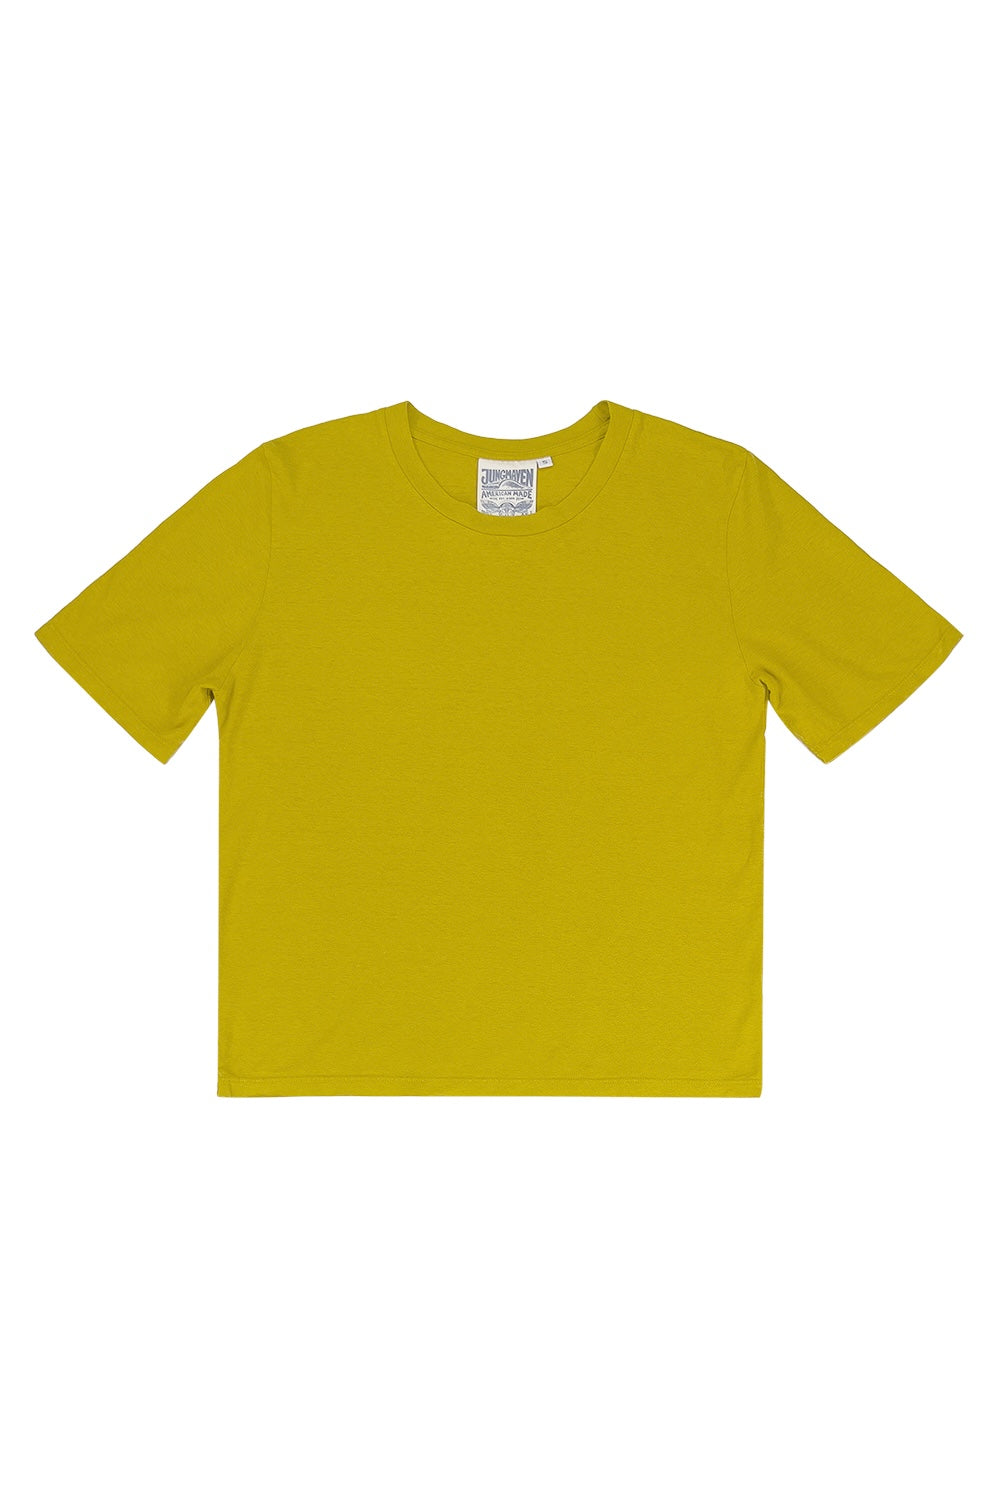 Silverlake Cropped Tee | Jungmaven Hemp Clothing & Accessories / Color: Citrine Yellow